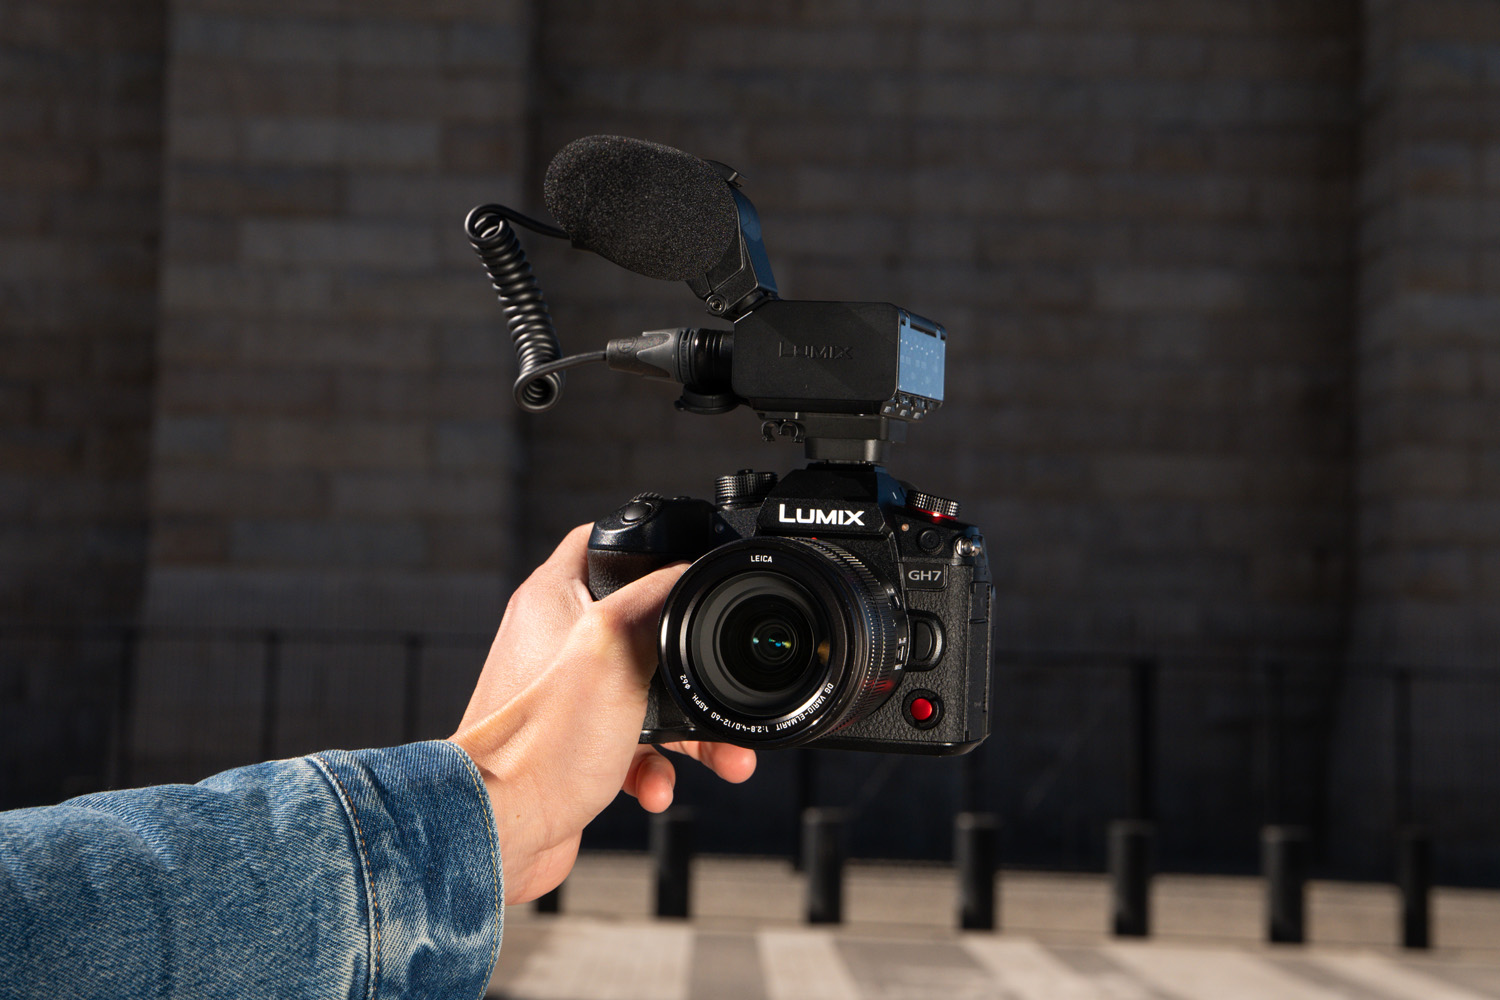 Close up of Panasonic Lumix GH7 camera with microphone attached being held as if taking a selfie in a street scene